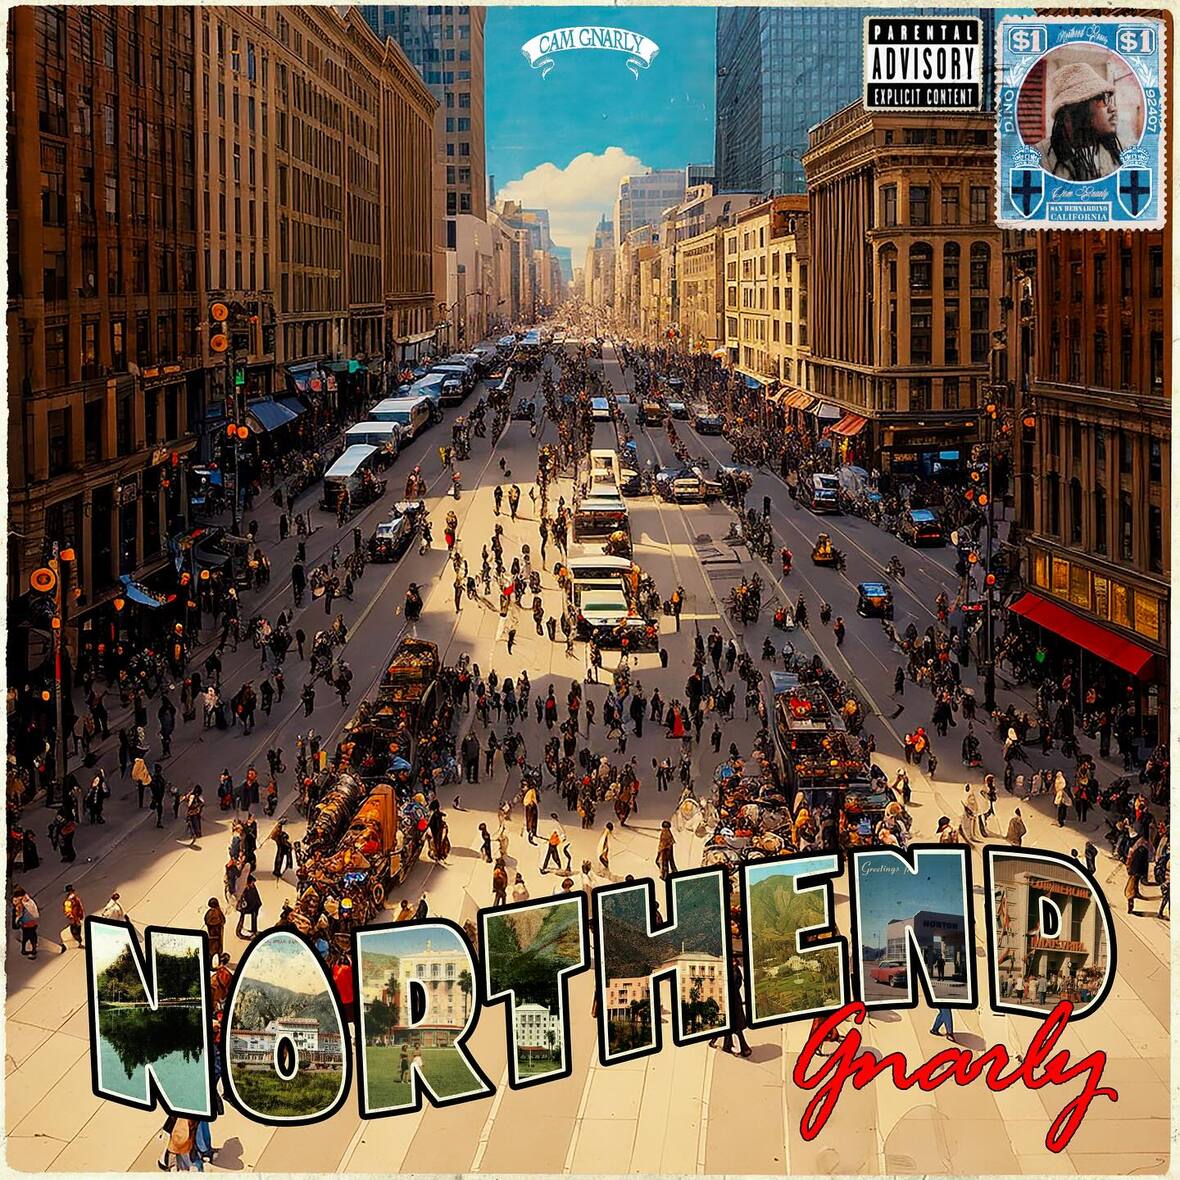 Cam Gnarly – “Blessed With, Stressed With” (Video) and “Northend Gnarly” (Album)